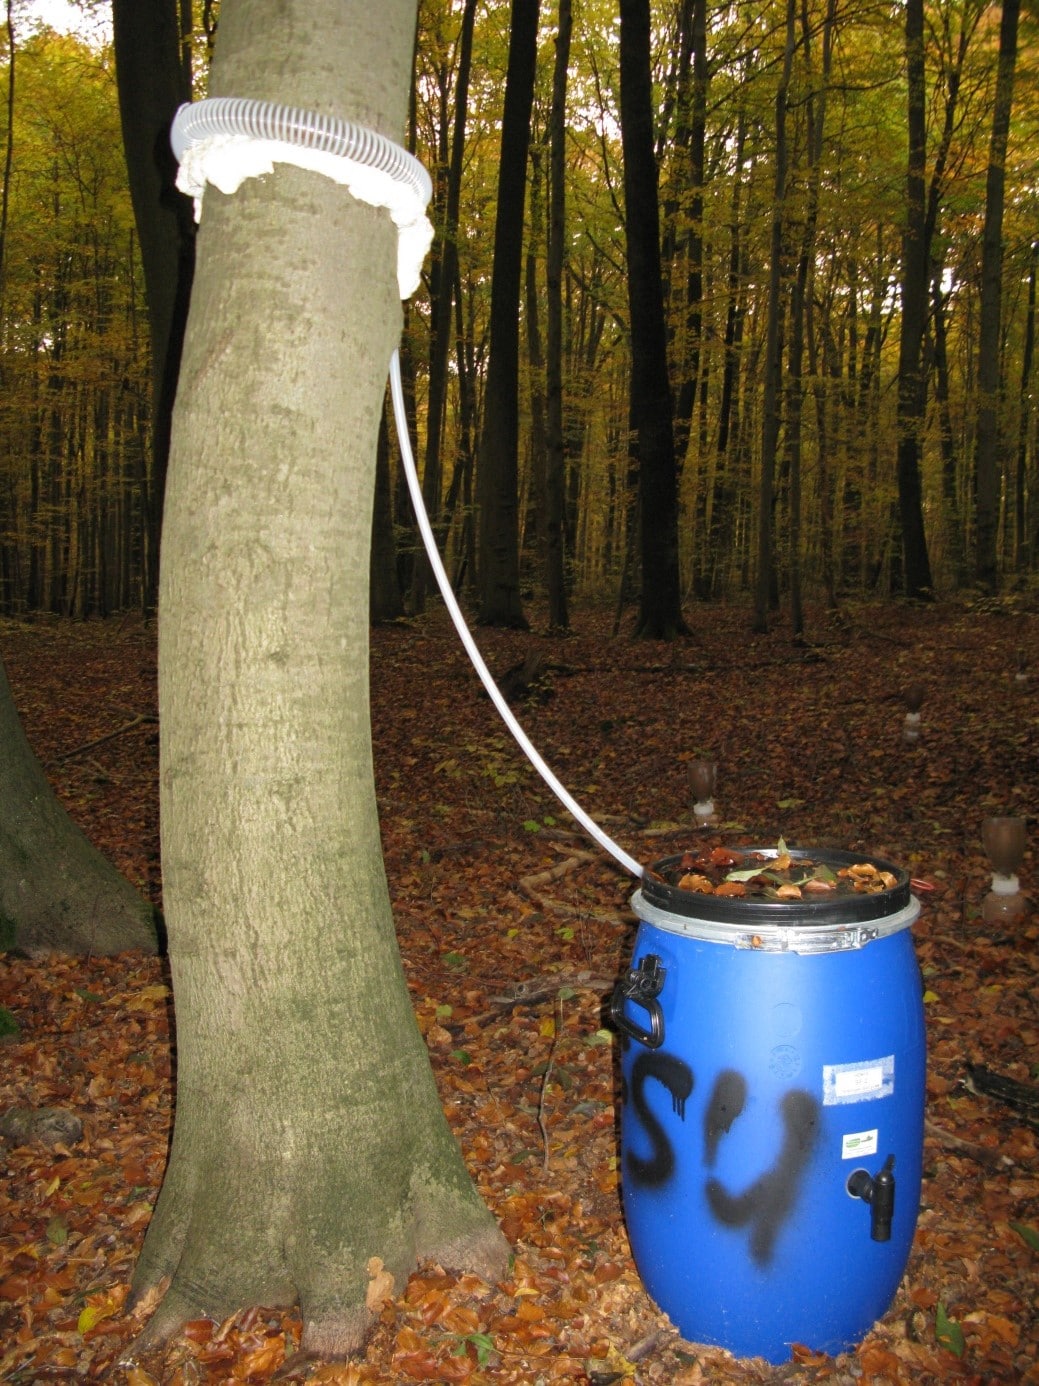 Picture: The photo shows a barrel to collect for trunk run-off water in an autumnal forest to the right of the trunk of a beech tree. A sleeve has been placed around the trunk with polyurethane foam that looks like whipped cream. The foam cuff fixes a ring-shaped hose made of plastic. From the hose, a second thinner hose leads down to the blue collection barrel that stands on the leaf-covered forest floor. The lid of the bin has a raised rim inside which water and leaves have accumulated. There are carrying handles and an outlet tap on the barrel.